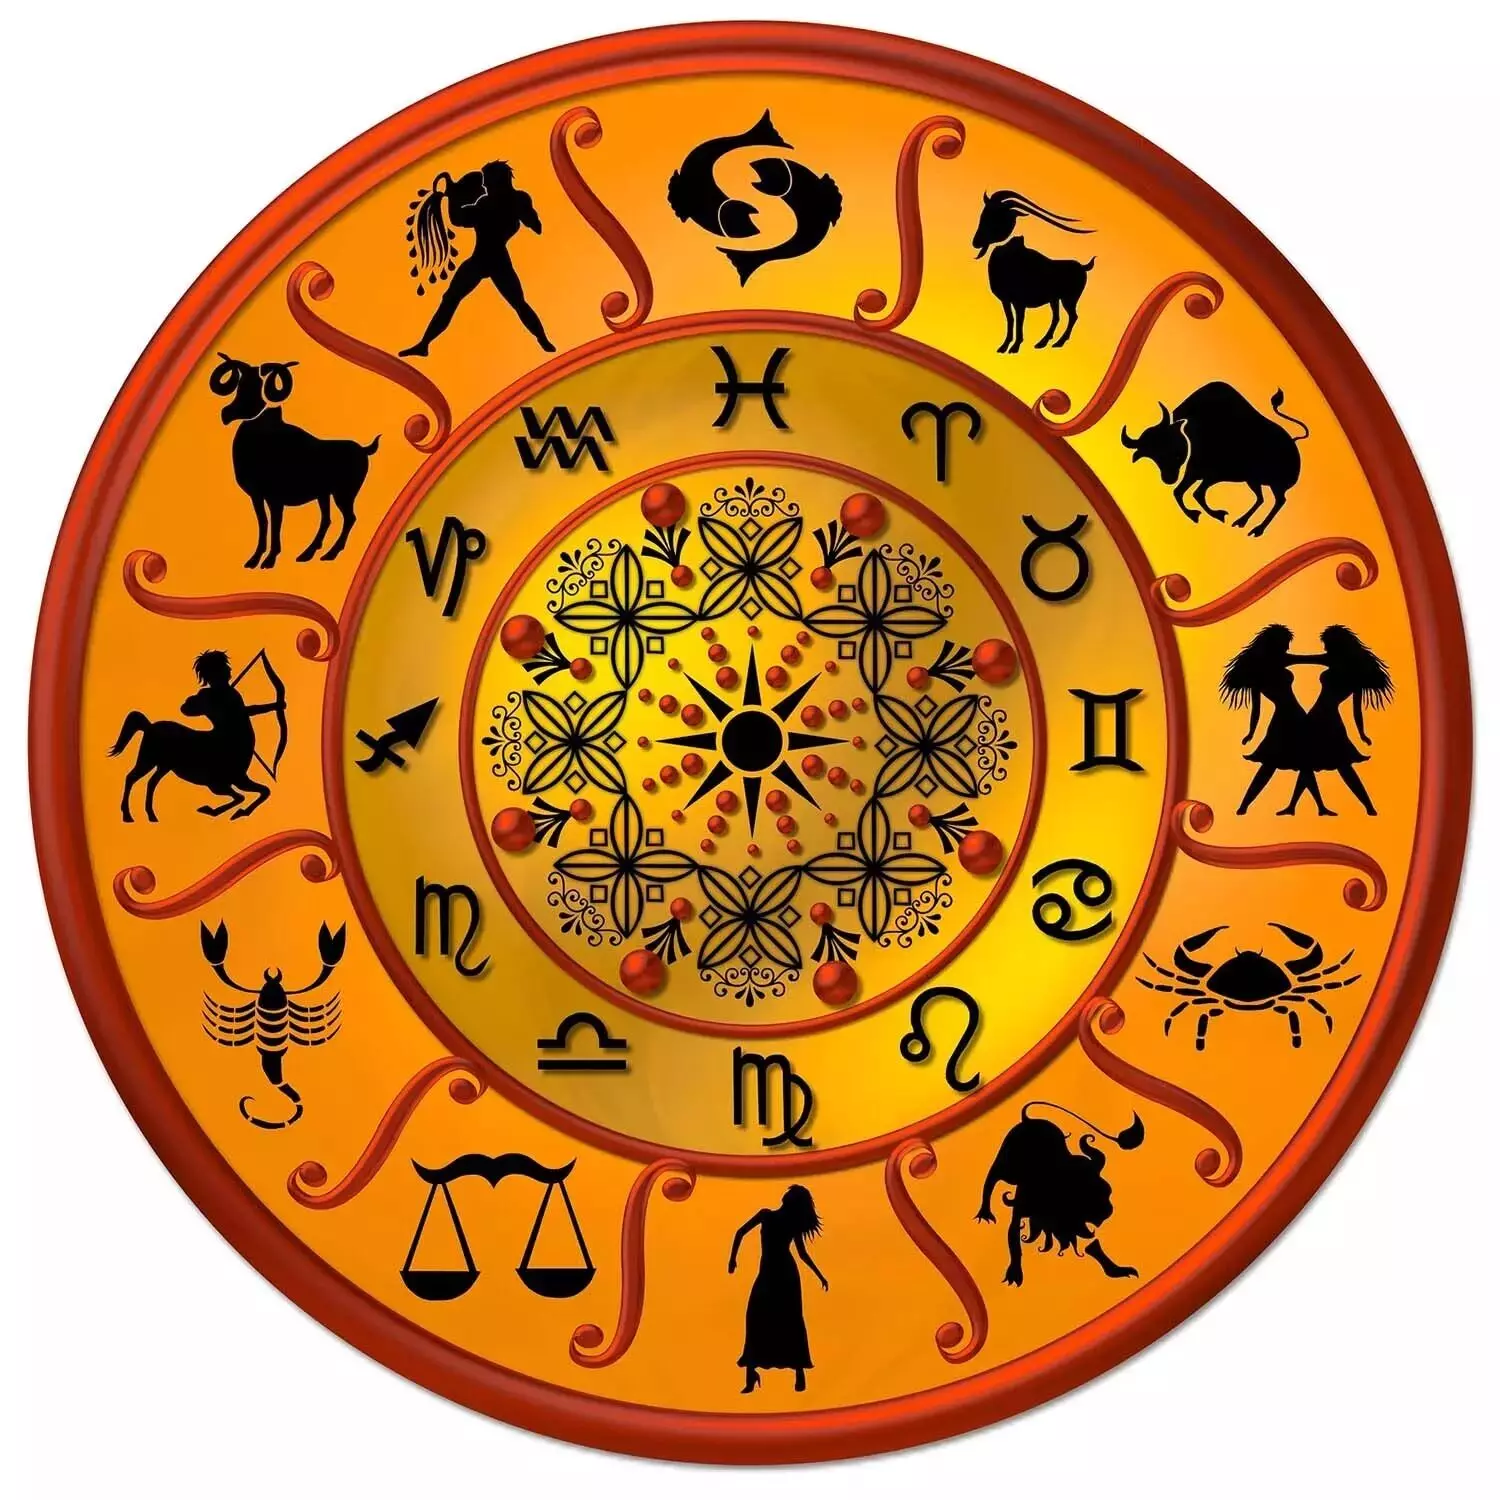 10 April – Know your todays horoscope